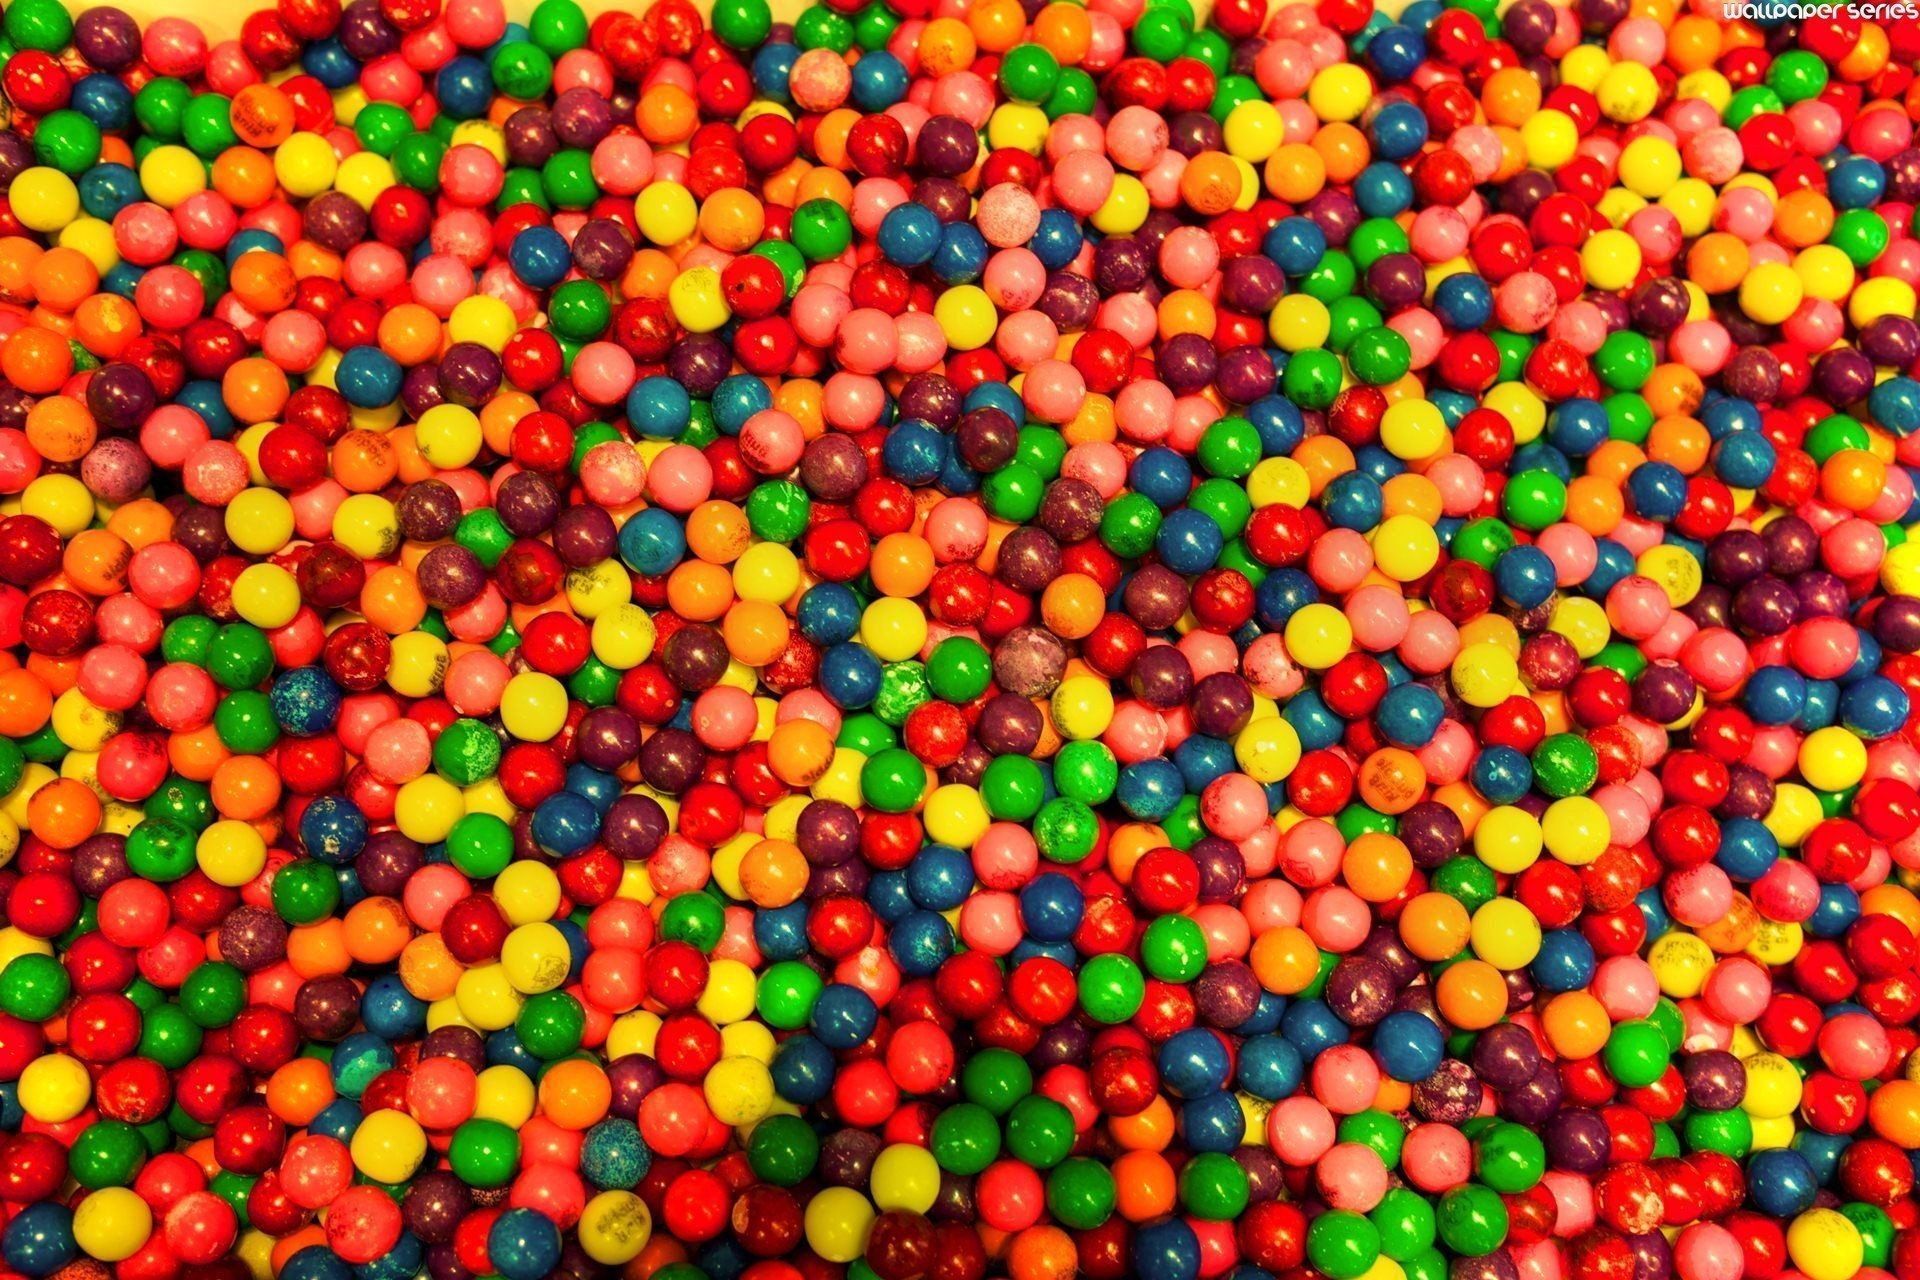 1920x1280 Candy #635191 Wallpapers for desktop high definition download